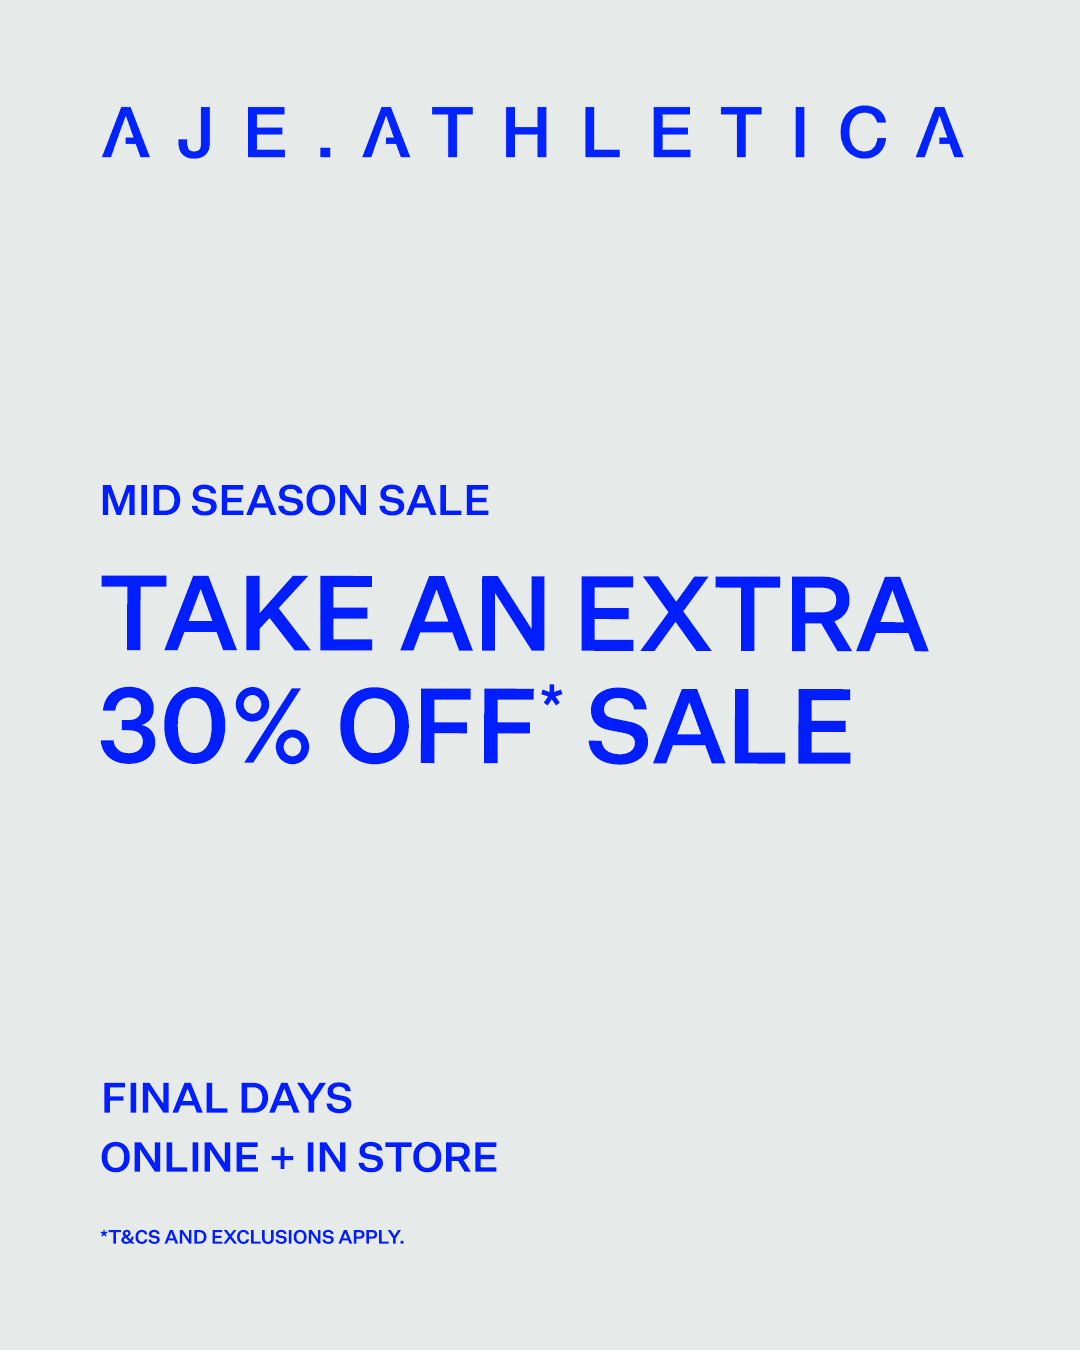 Mid Season Sale Up to 30% Off